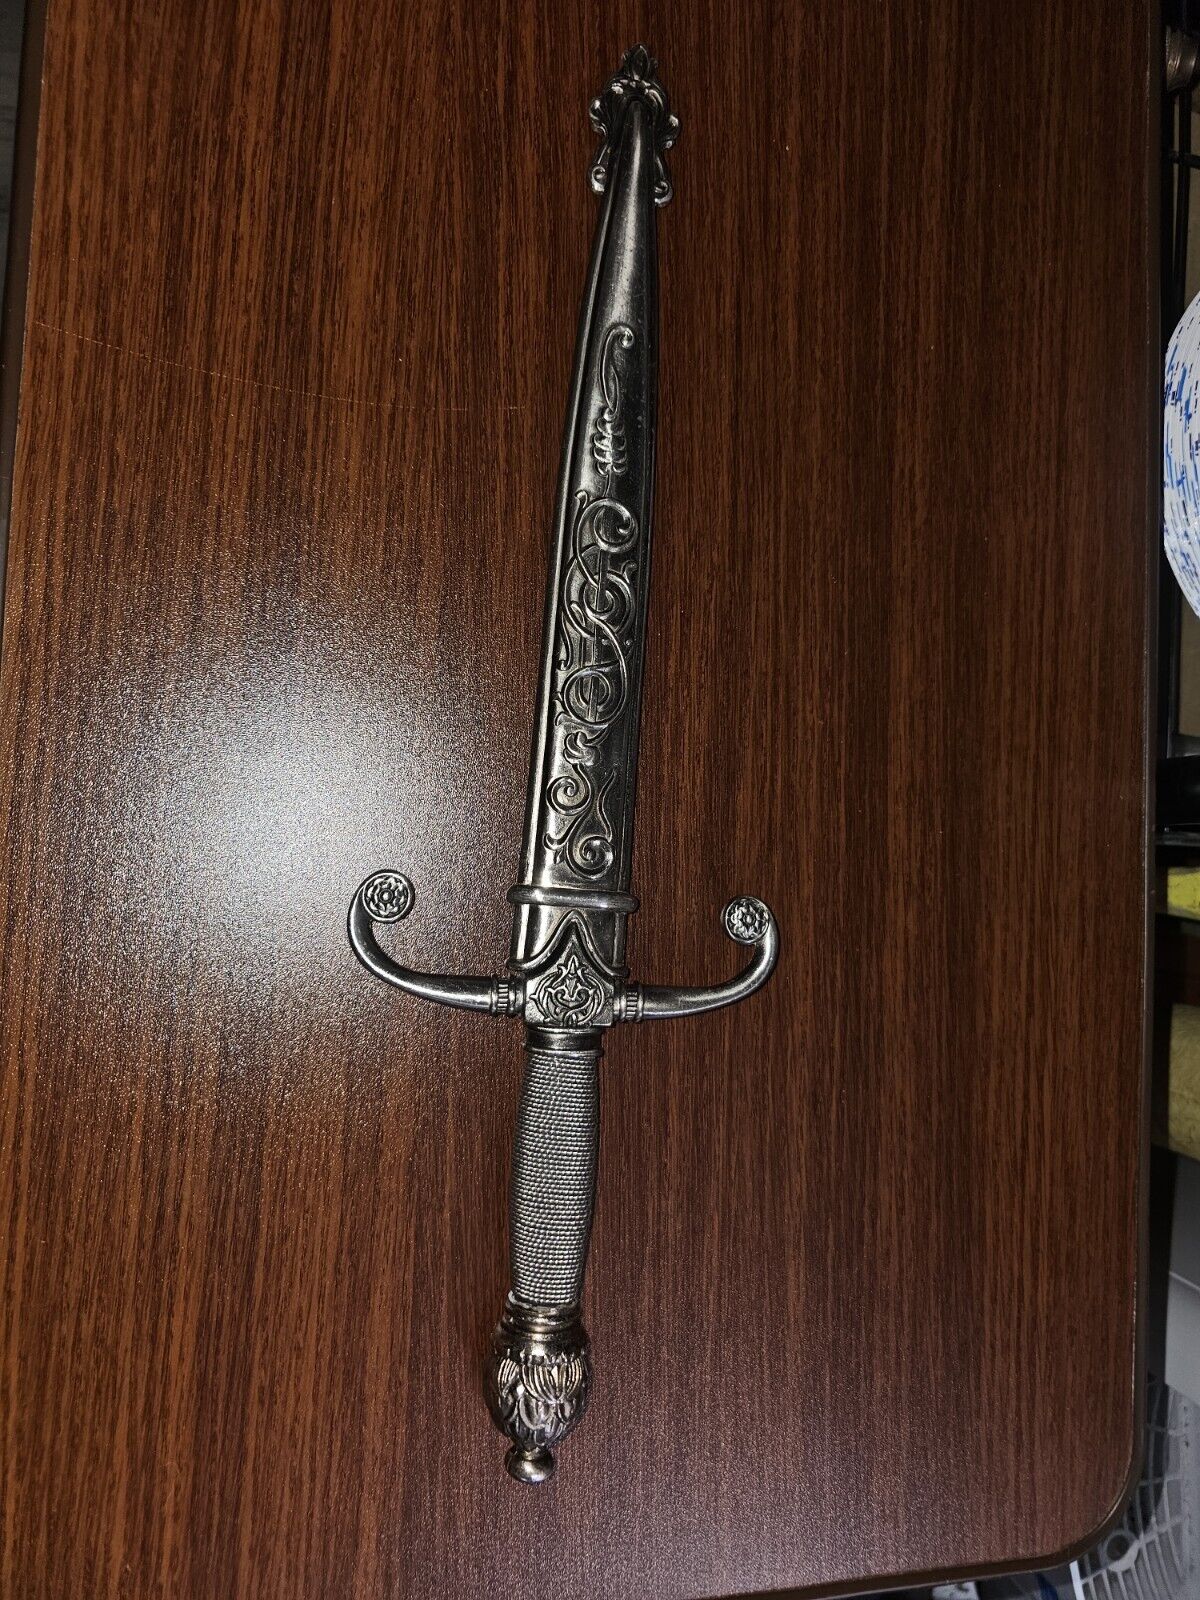 Medieval Times Dagger (Looks Like Spider-Man 2 Prop)